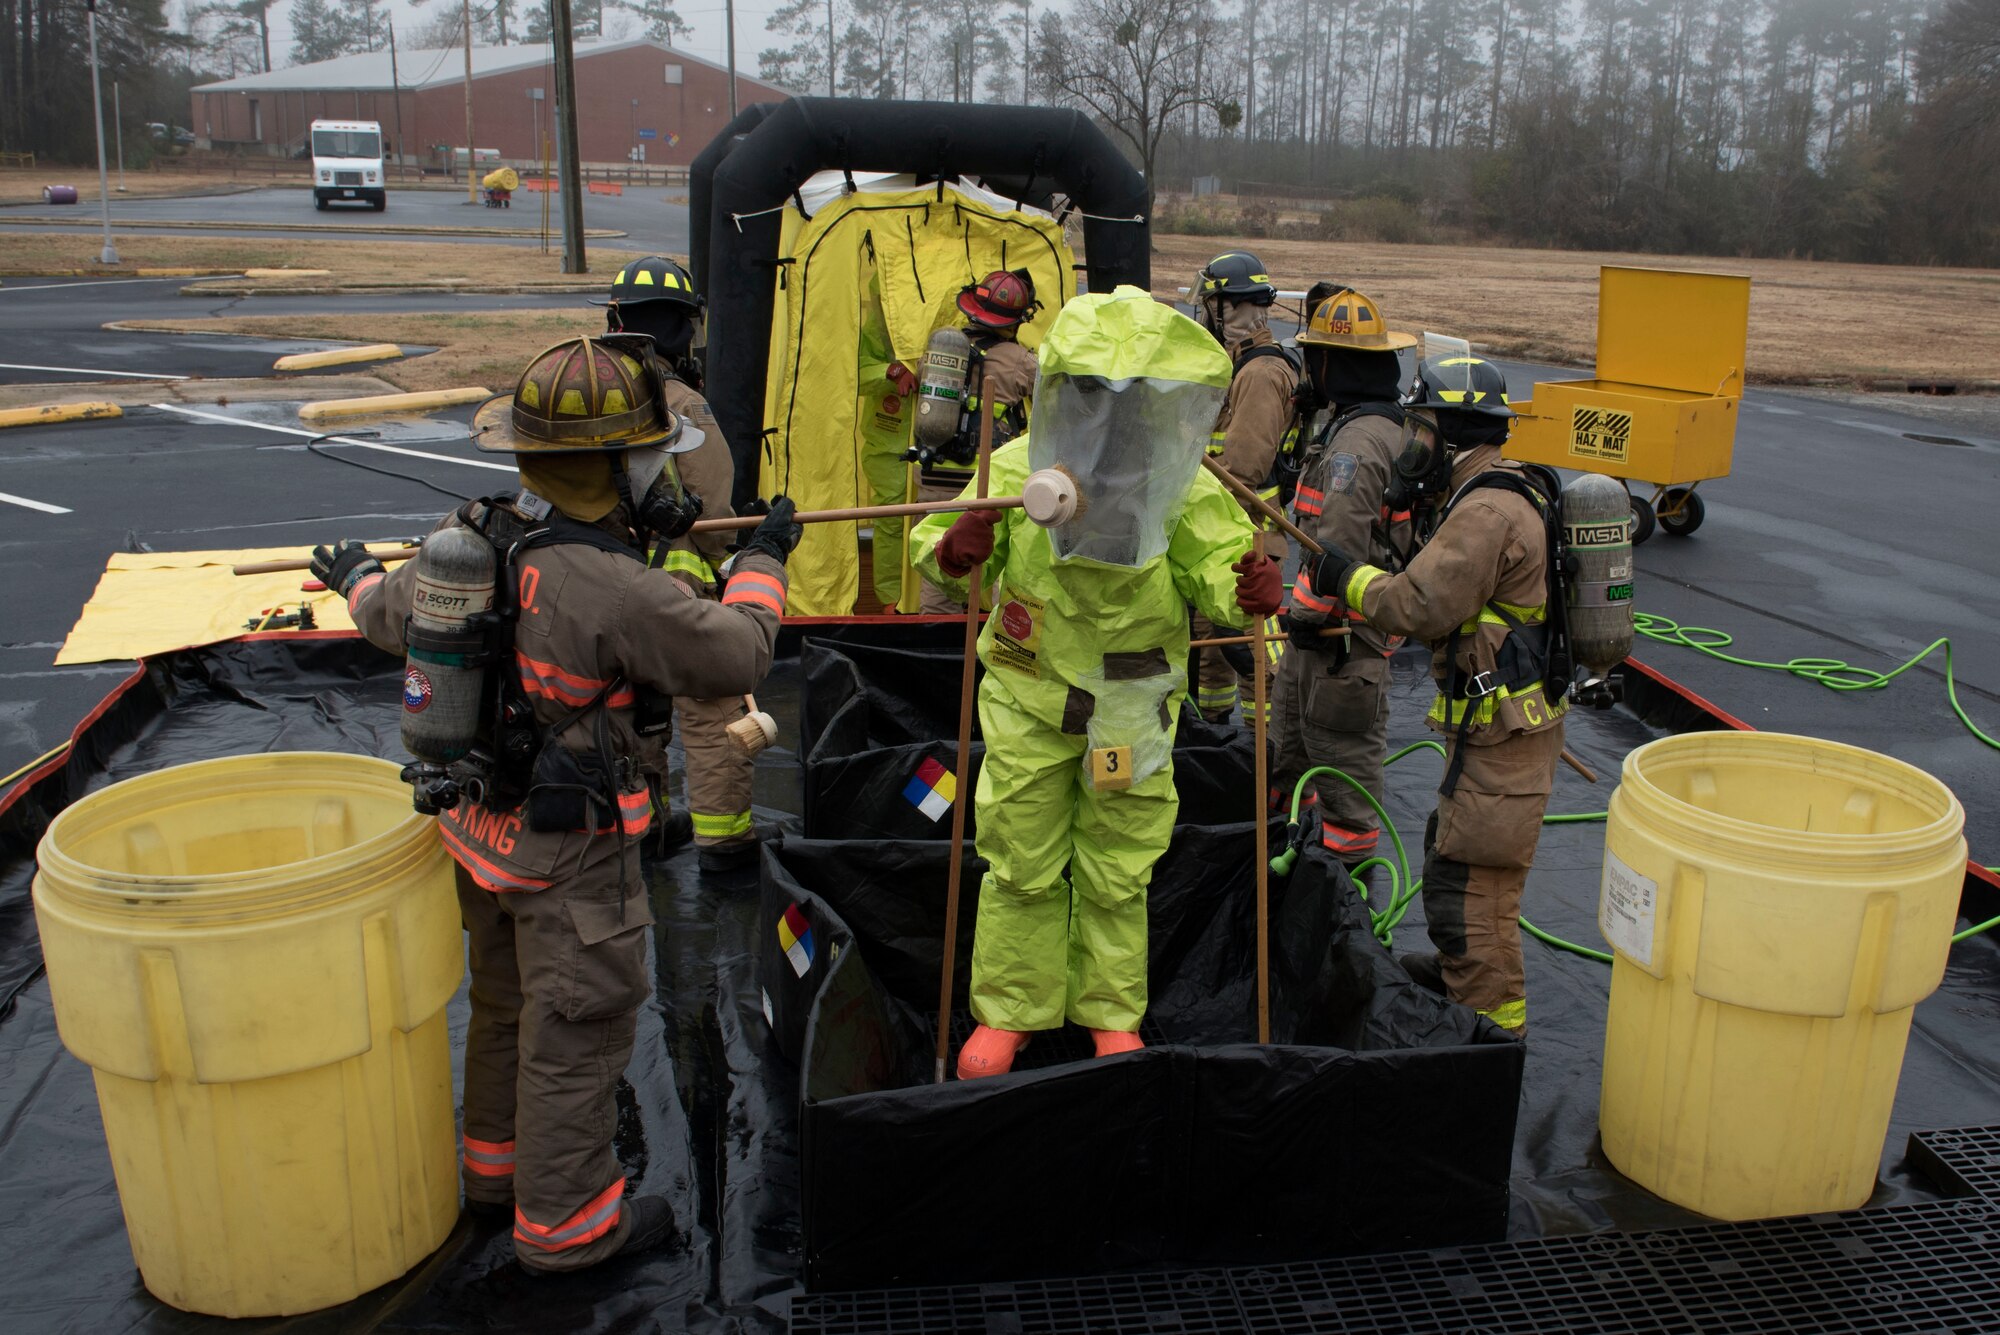 Members of the 4th Fighter Wing and the Goldsboro Fire Department, conduct decontamination procedures during a Hazardous Material Spill Response exercise, Dec. 9, 2019, in Goldsboro, N.C.